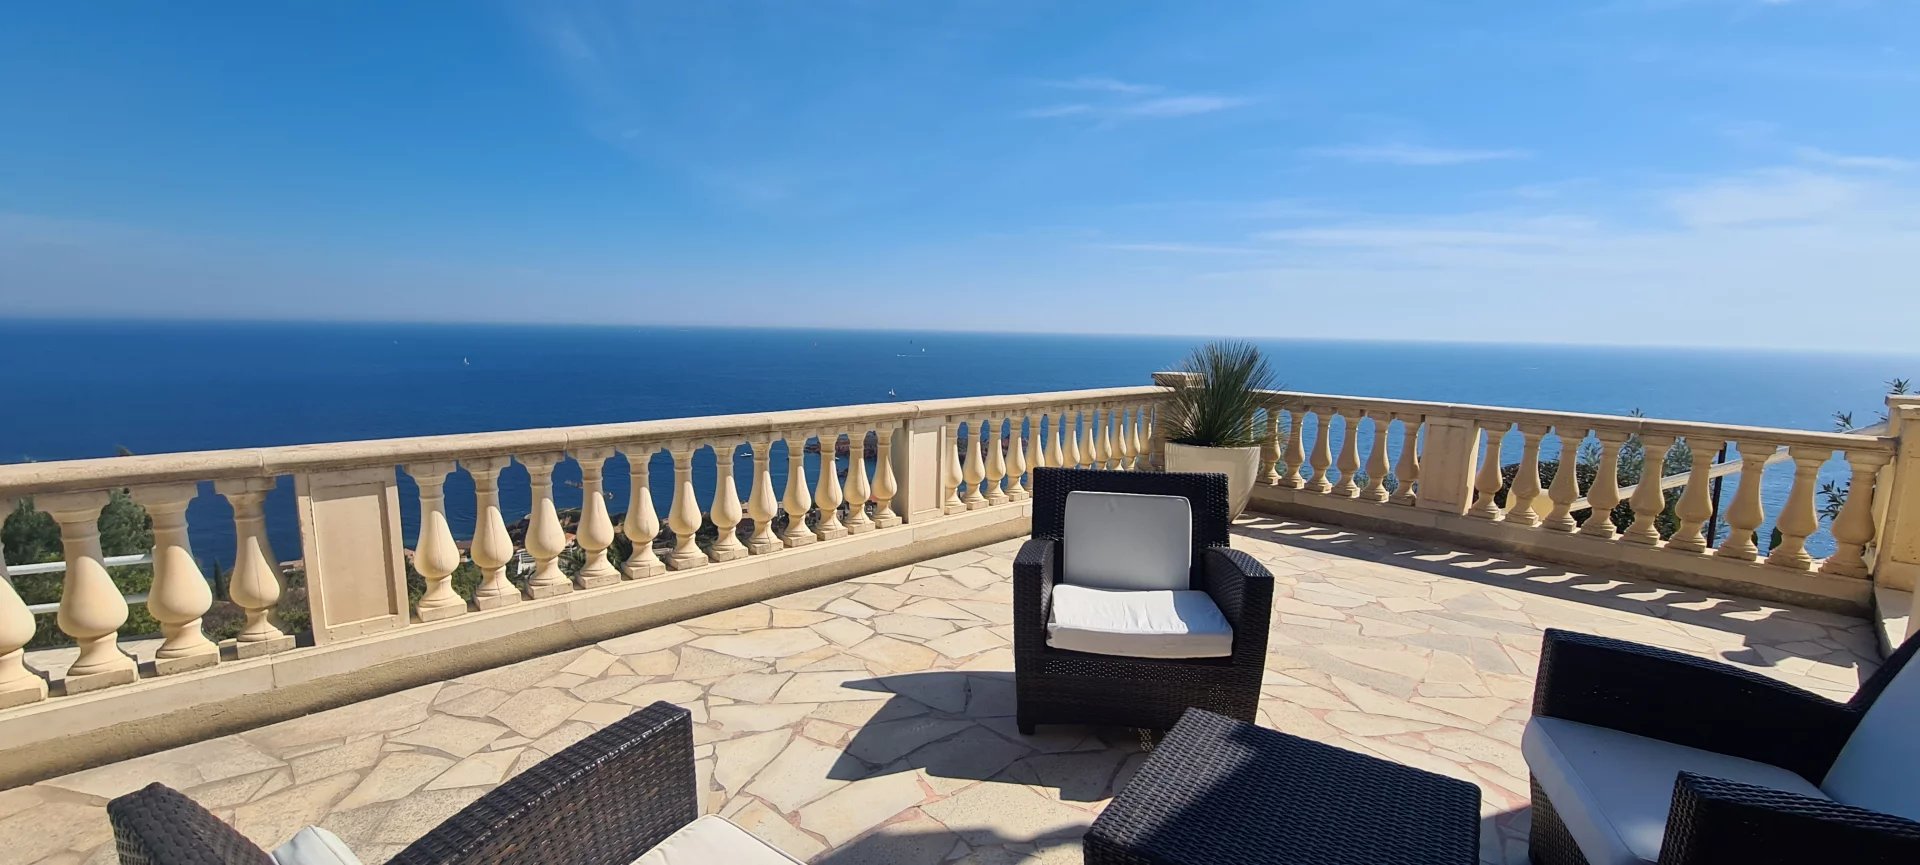 SPLENDID VILLA WITH PANORAMIC SEA VIEW BETWEEN CANNES AND SAINT RAPHAEL